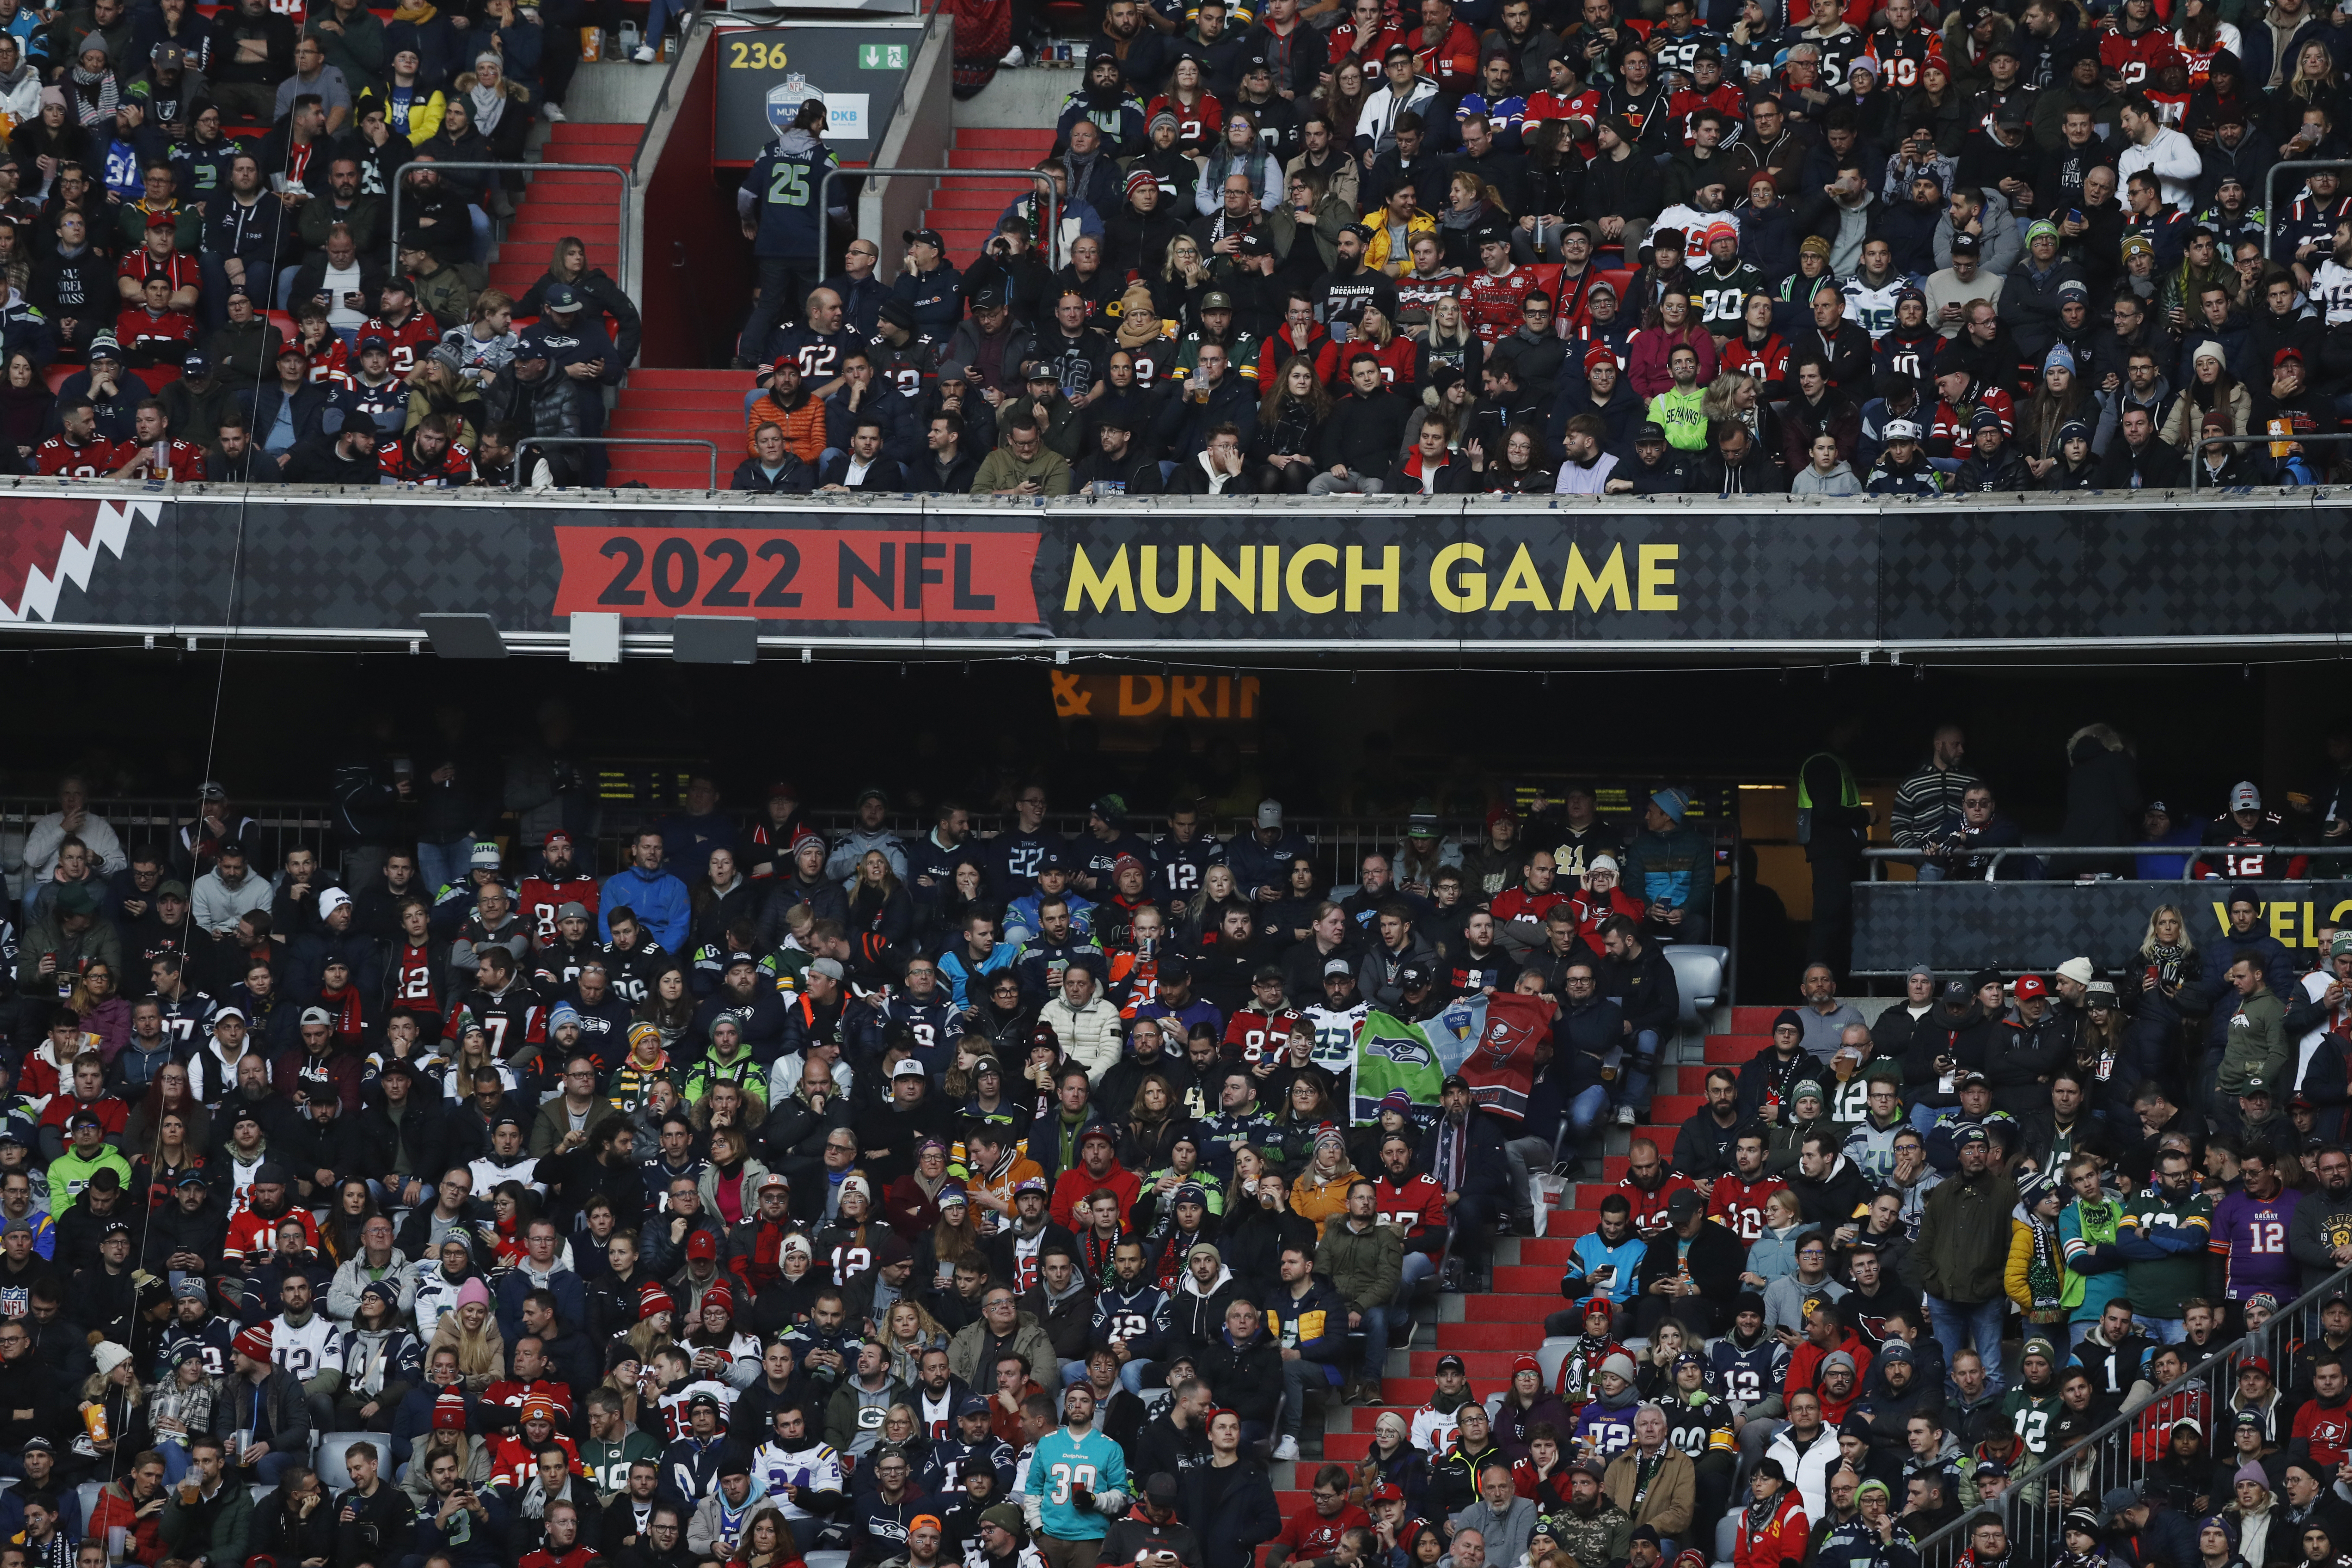 Success of Germany game could lead to more NFL games across Europe